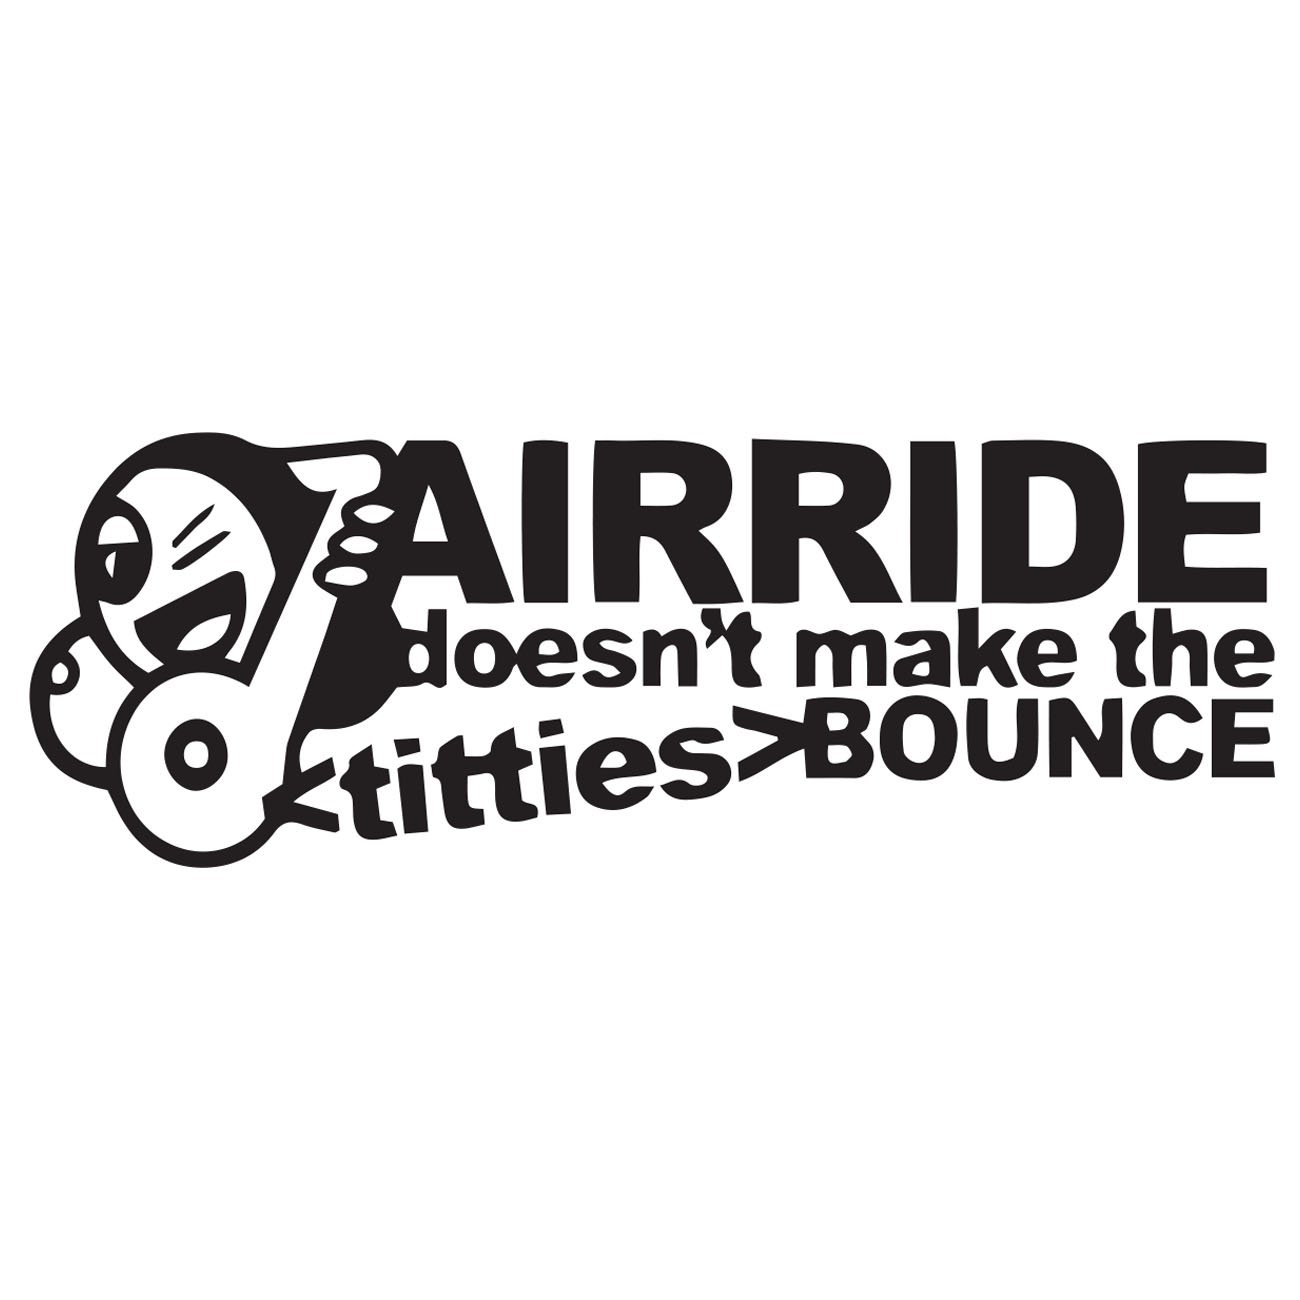 Airride dosent make the titties bounce